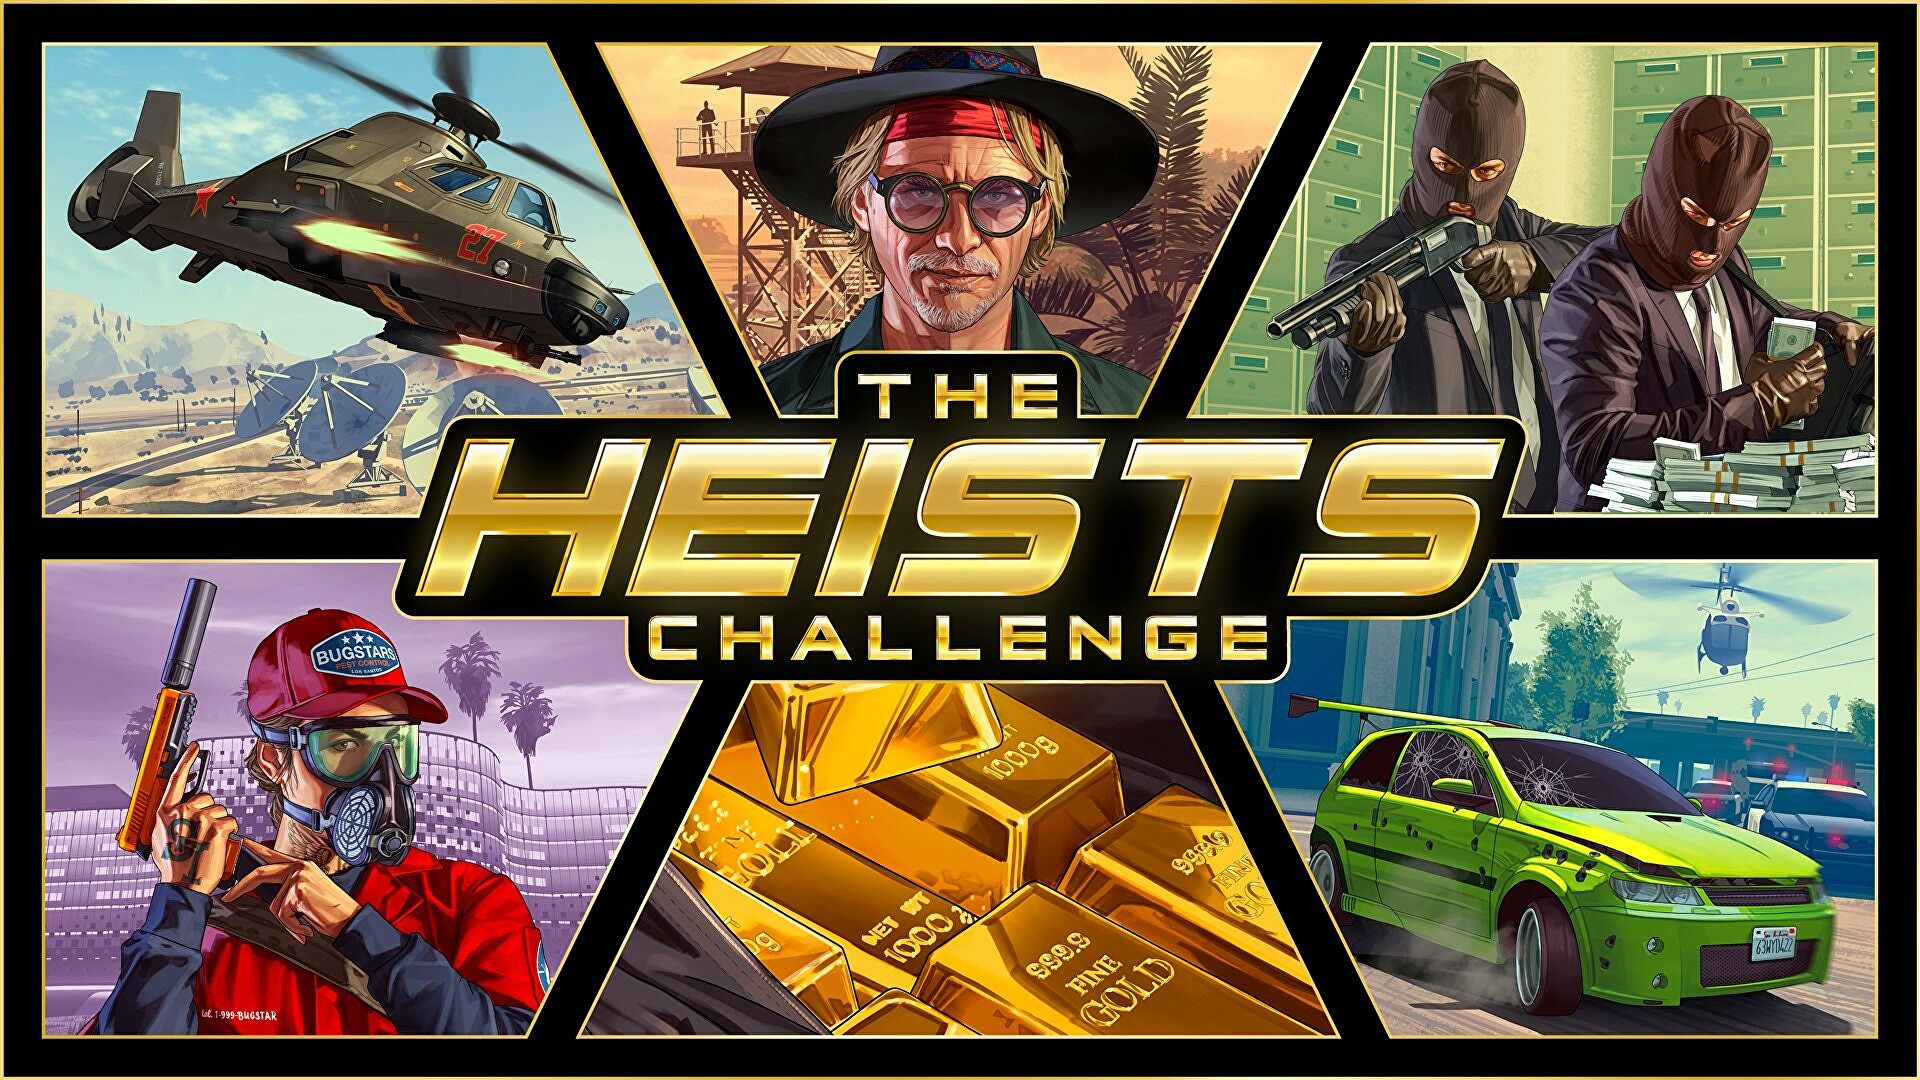 GTA 5 Heists event wraps up with a $2 trillion challenge